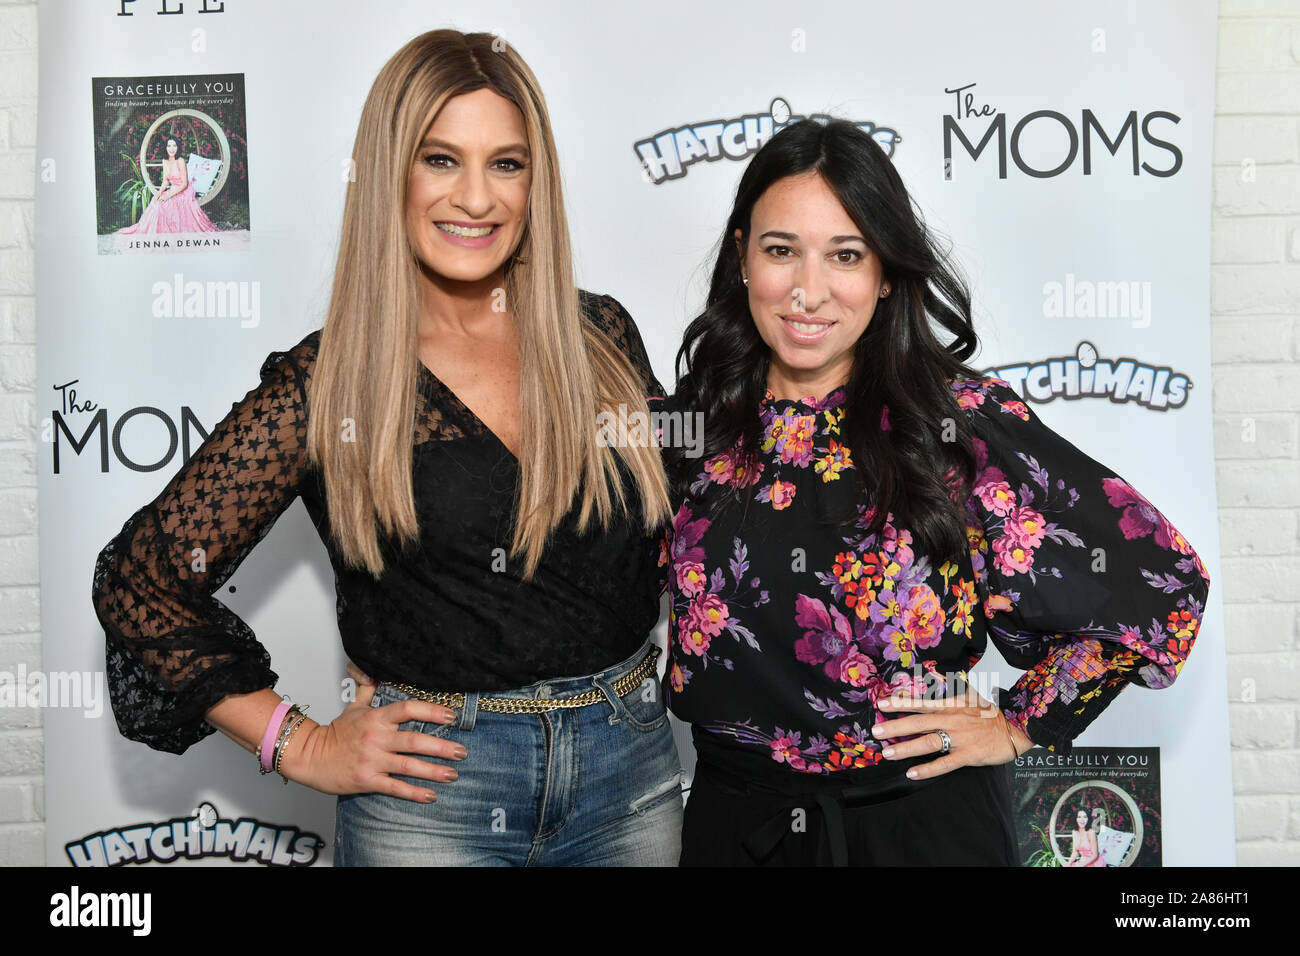 'Gracefully You' Mamarazzi event, New York, USA - 24 Oct 2019 - The MOMS - Denise Albert and Melissa Gerstein Stock Photo